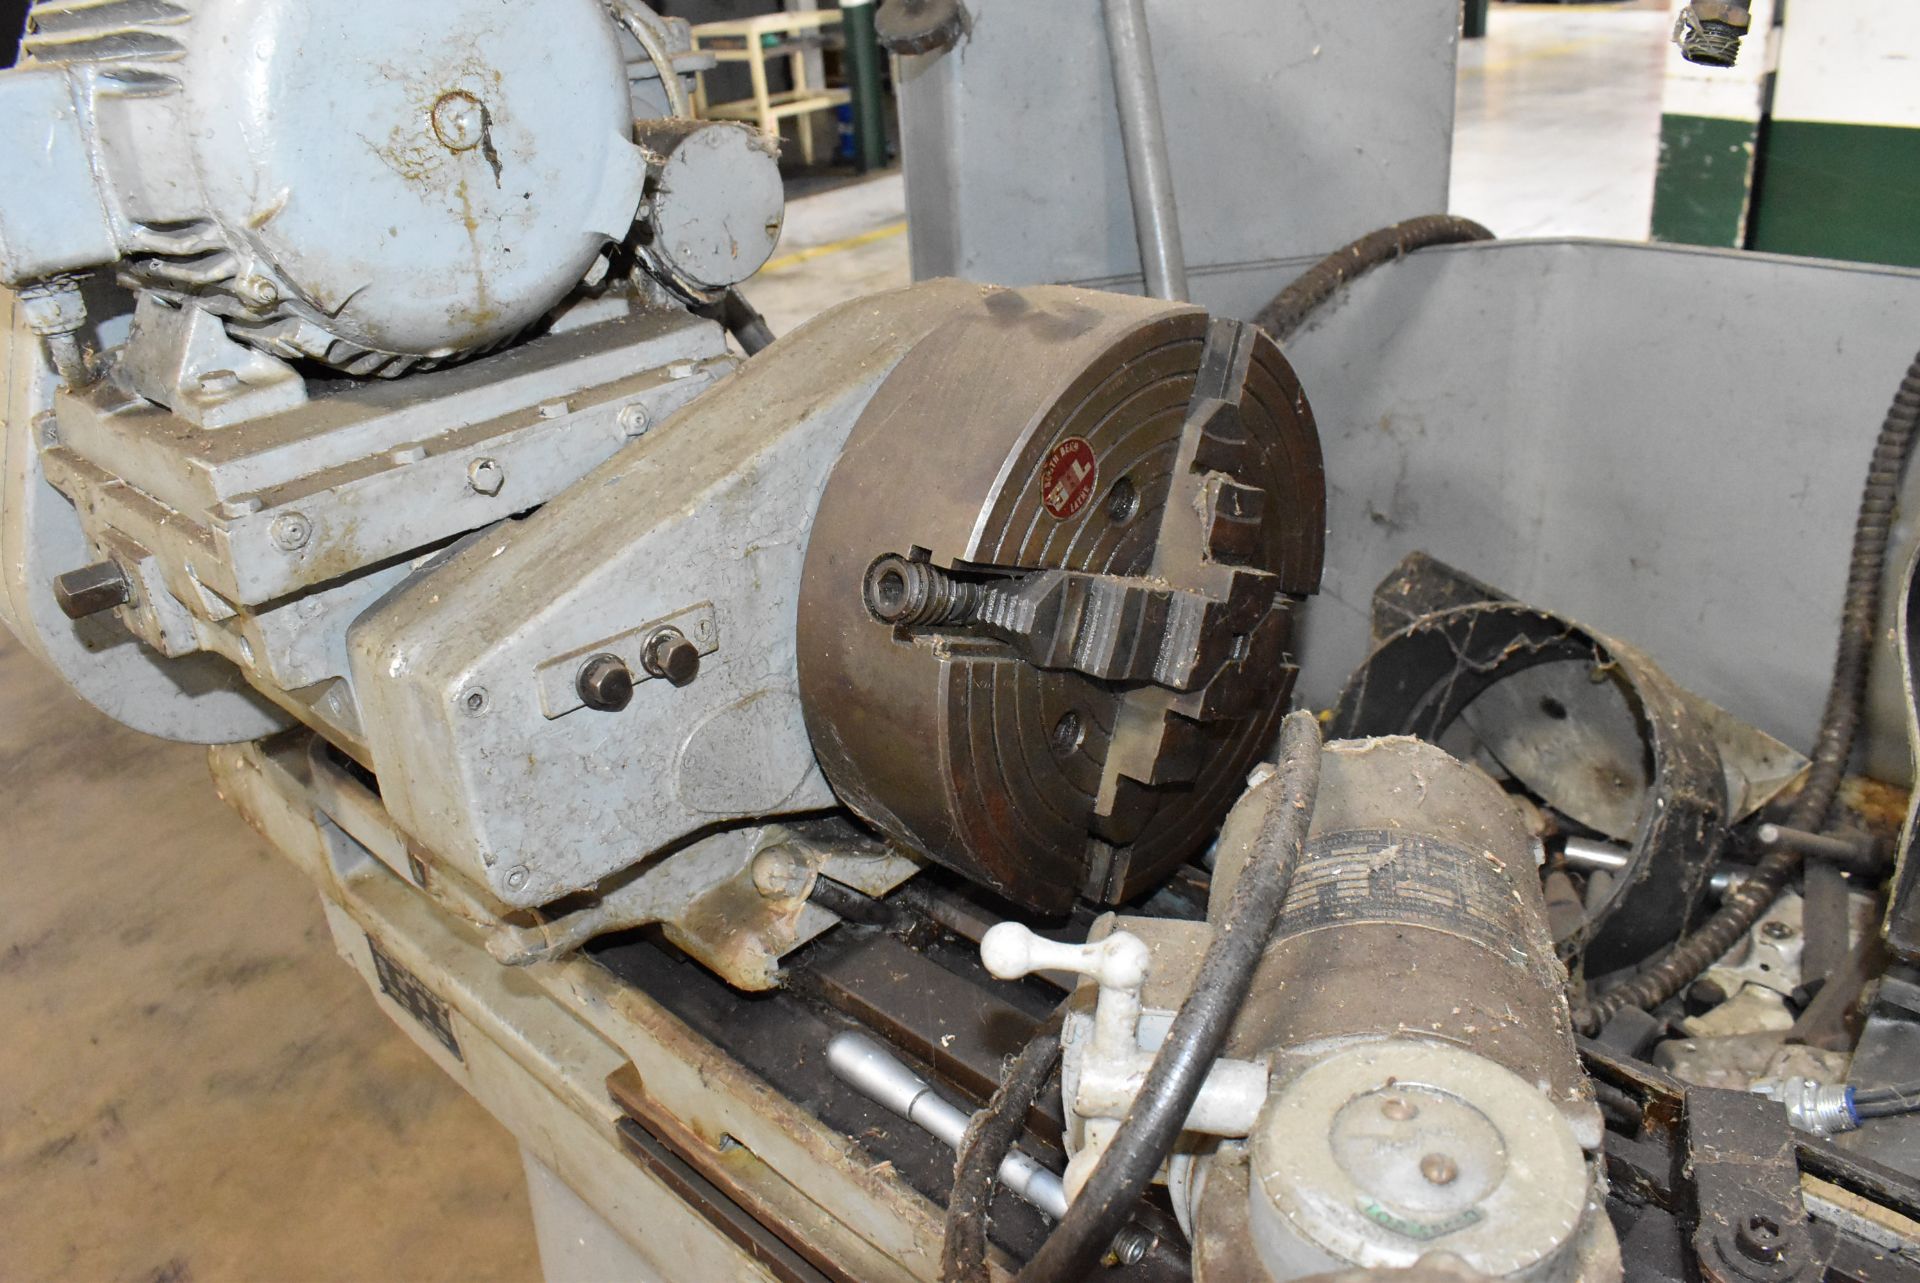 JONES SHIPMAN UNIVERSAL CYLINDRICAL AND INTERNAL GRINDER WITH 10" 4 JAW CHUCK, MAIN SPINDLE SPEEDS - Image 3 of 15